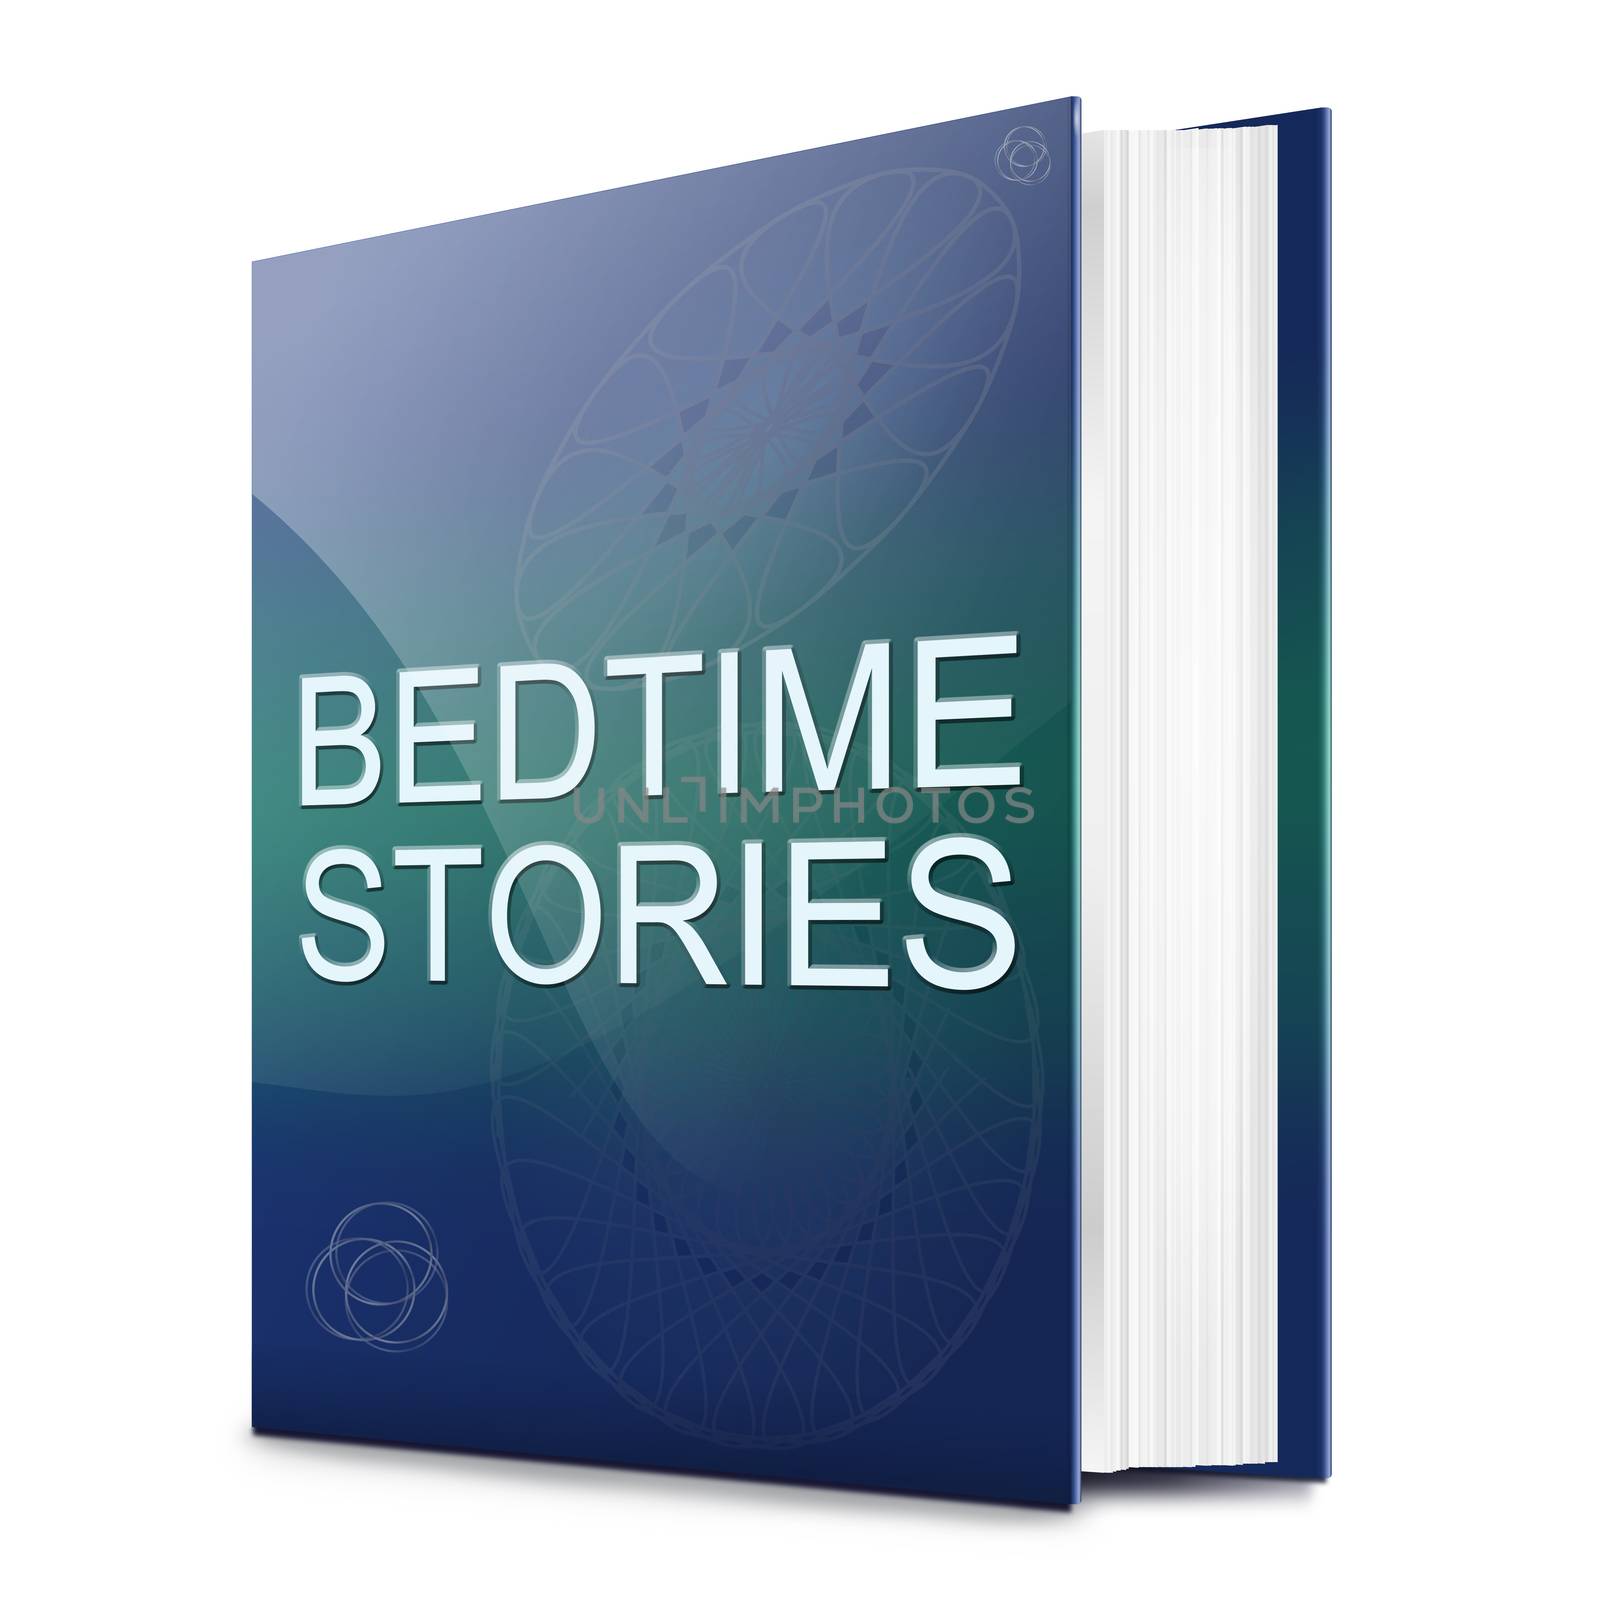 Bedtime stories concept. by 72soul